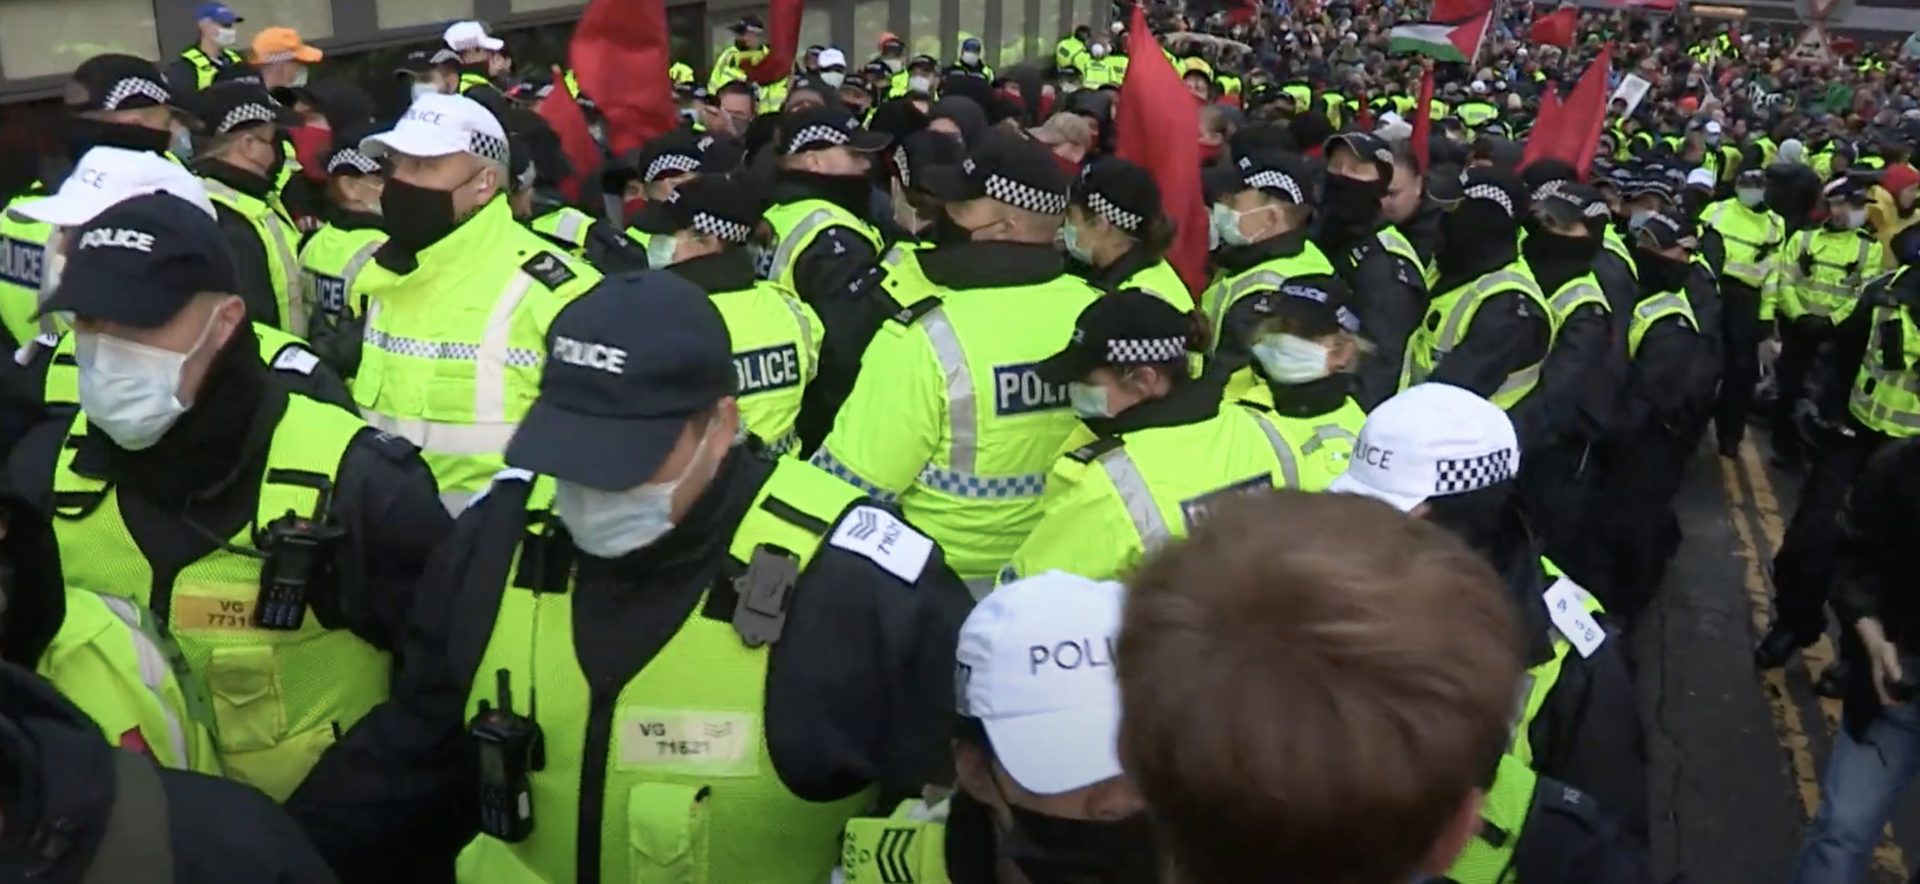 Police Scotland 'lied' about its policing of two protests during COP26, according to new report 4